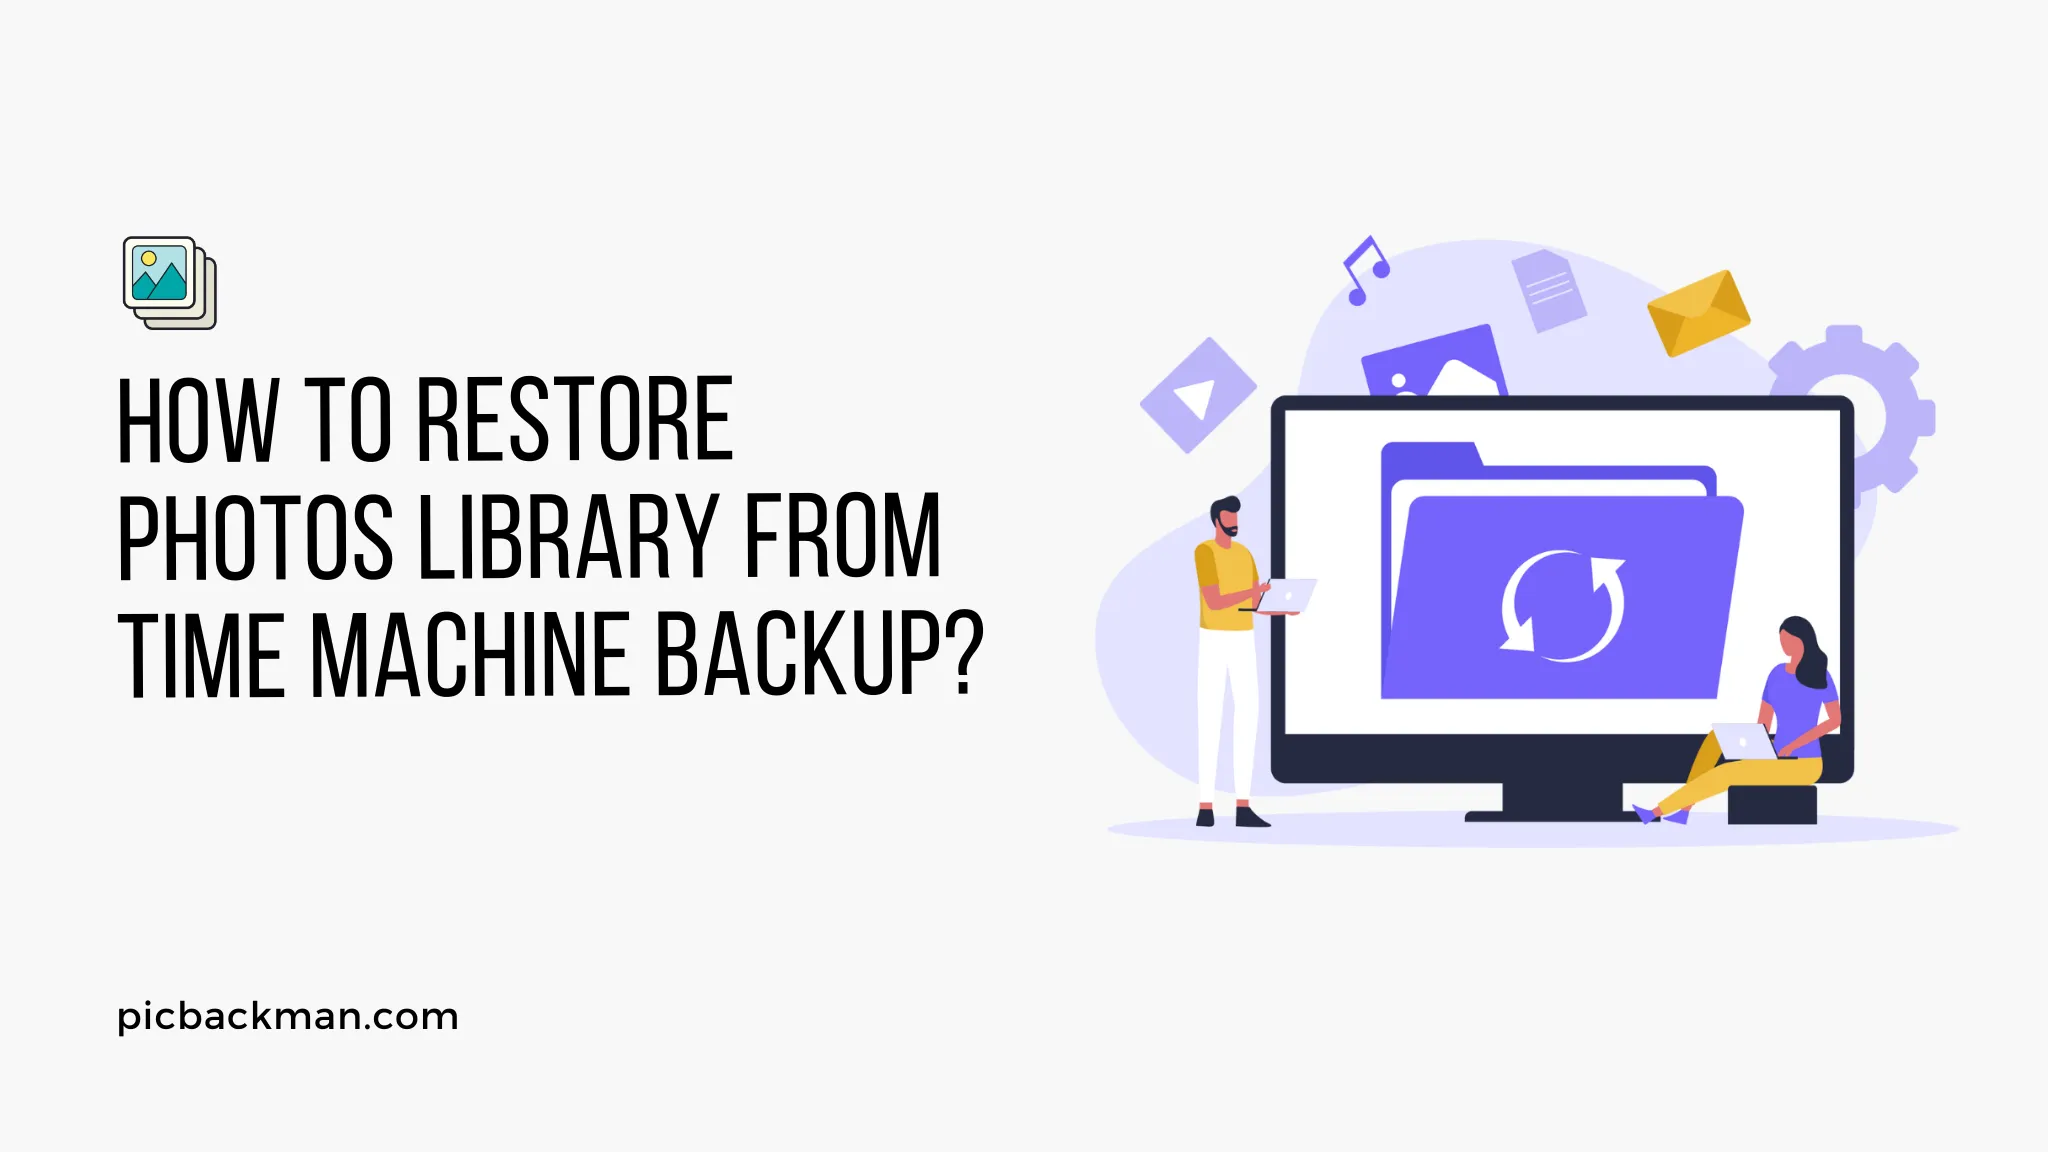 How to Restore Photos Library from Time Machine Backup